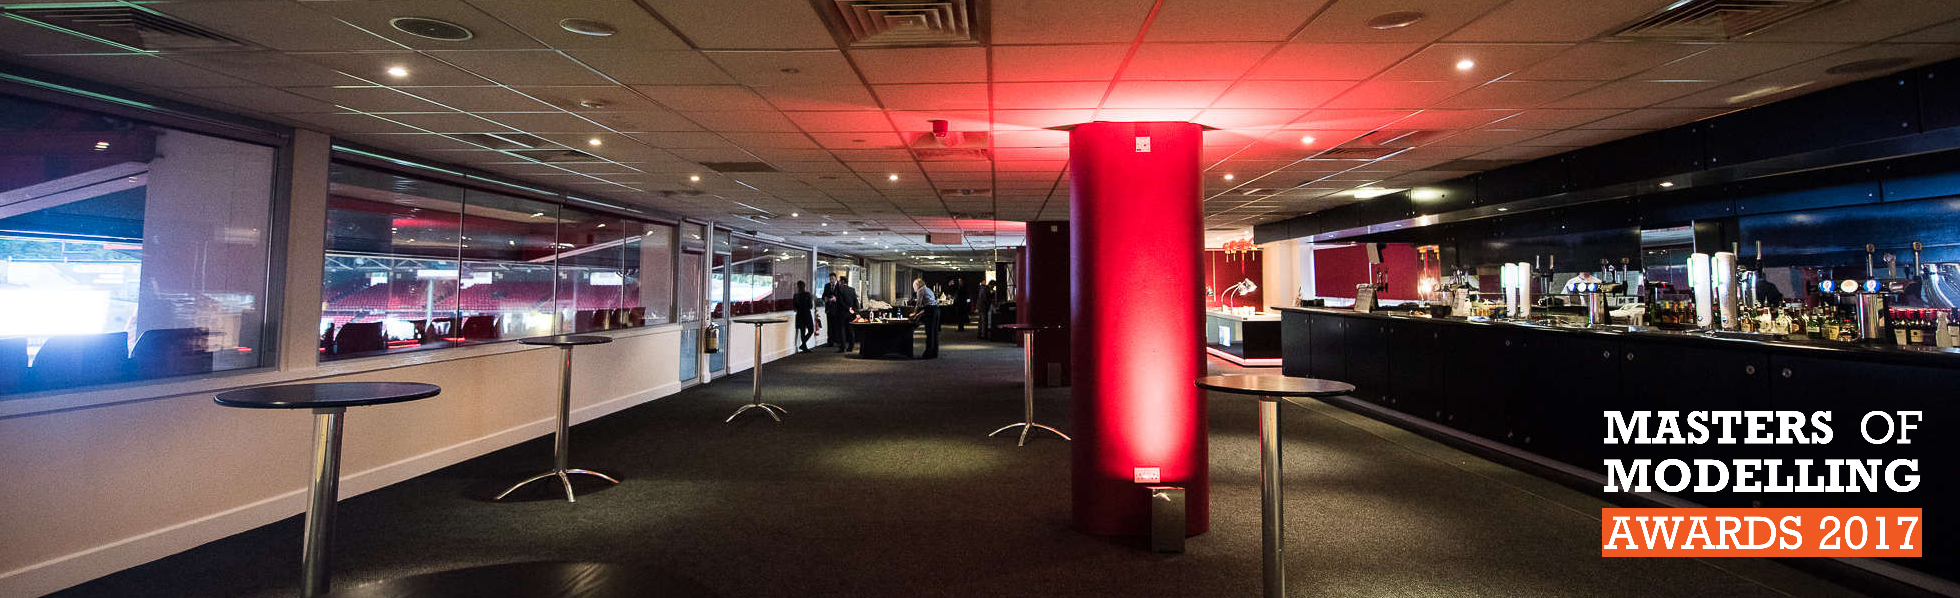 The Player's Lounge Area